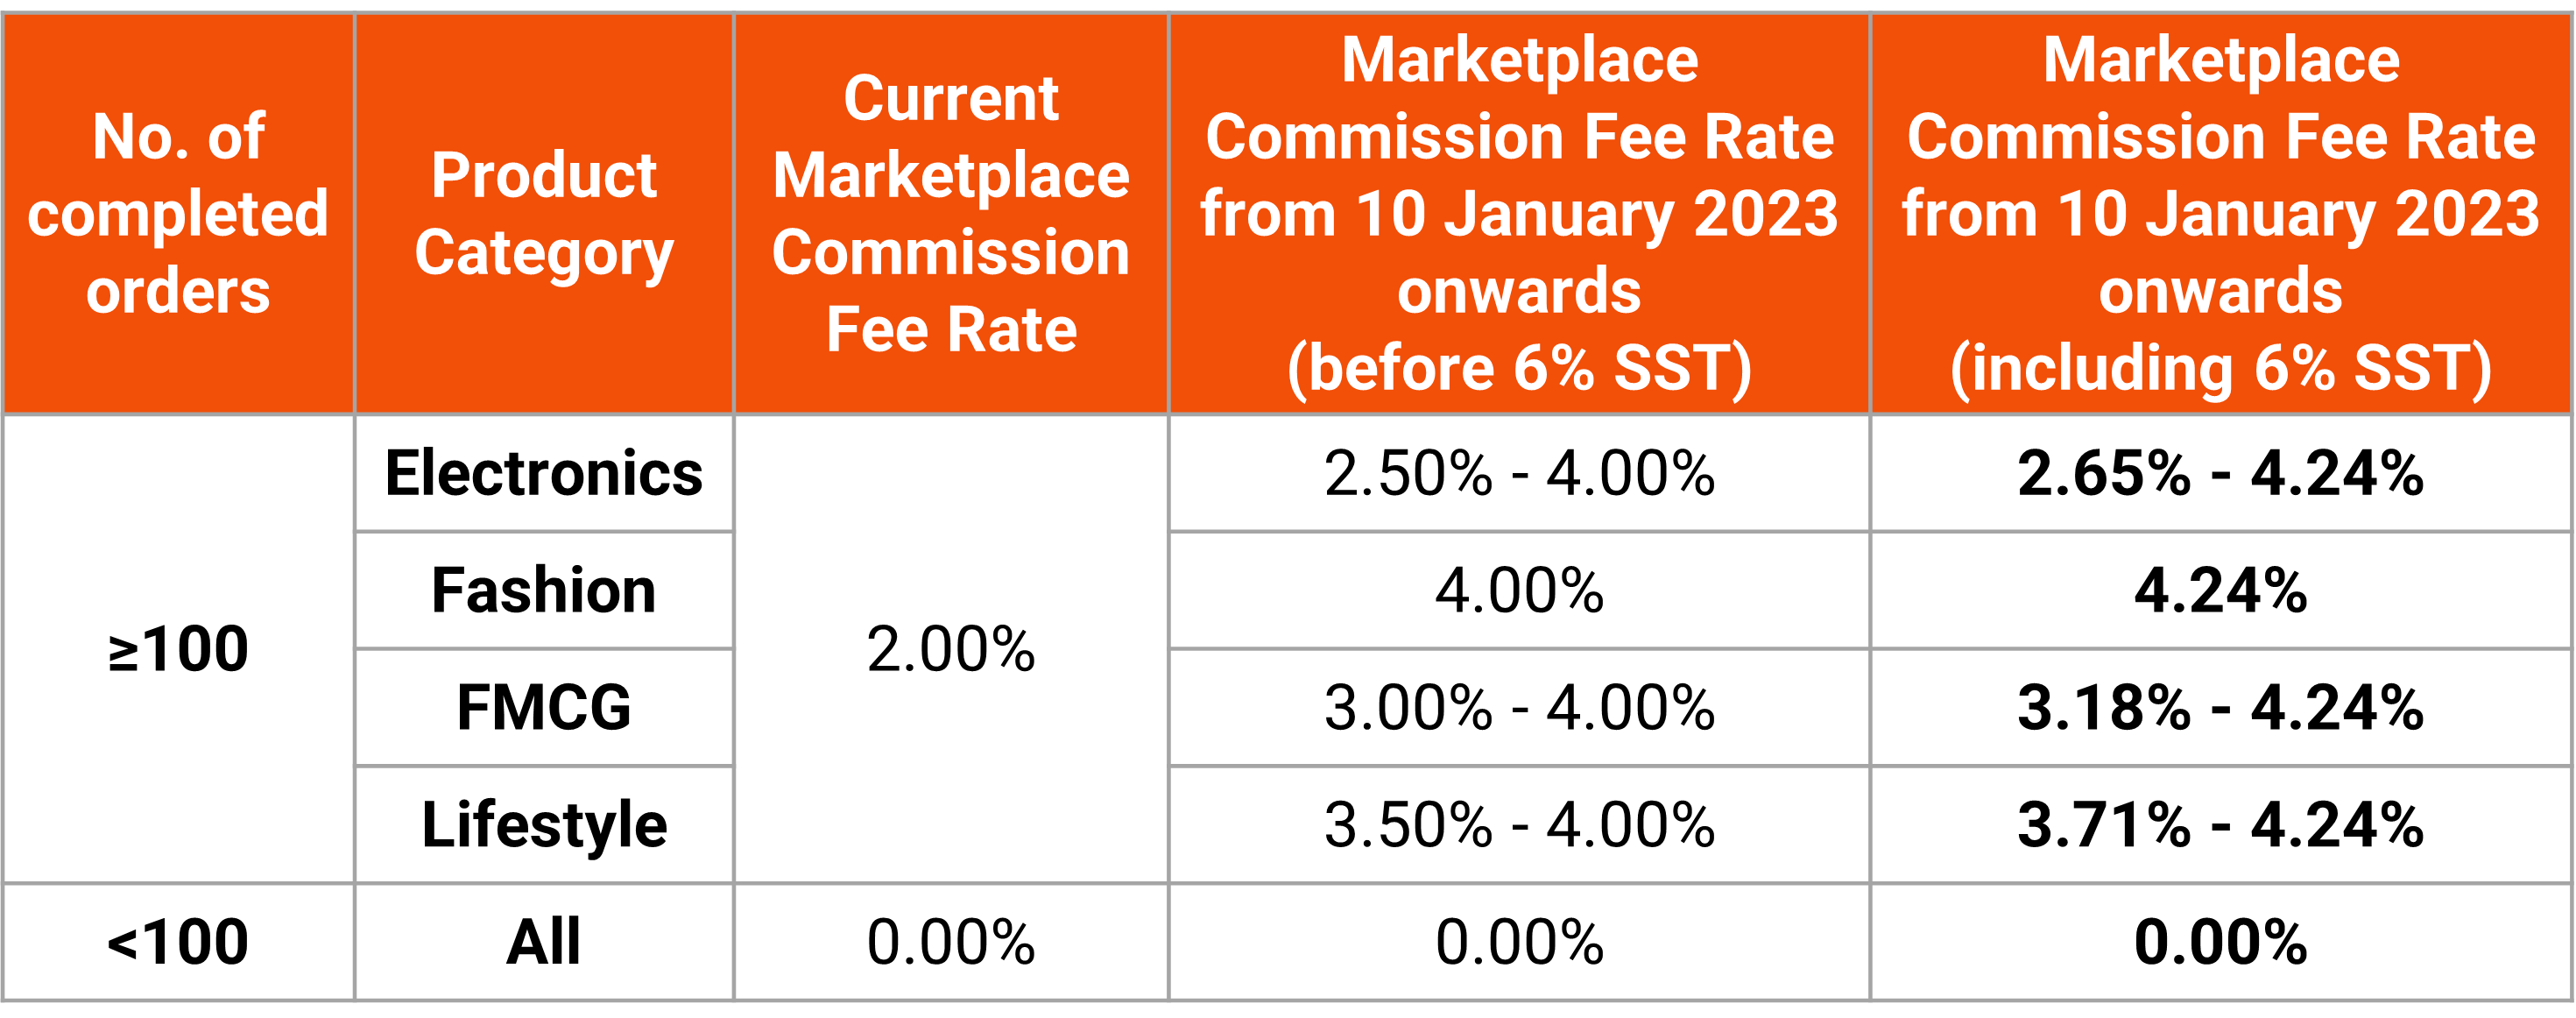 shopee marketplace commission fee rate